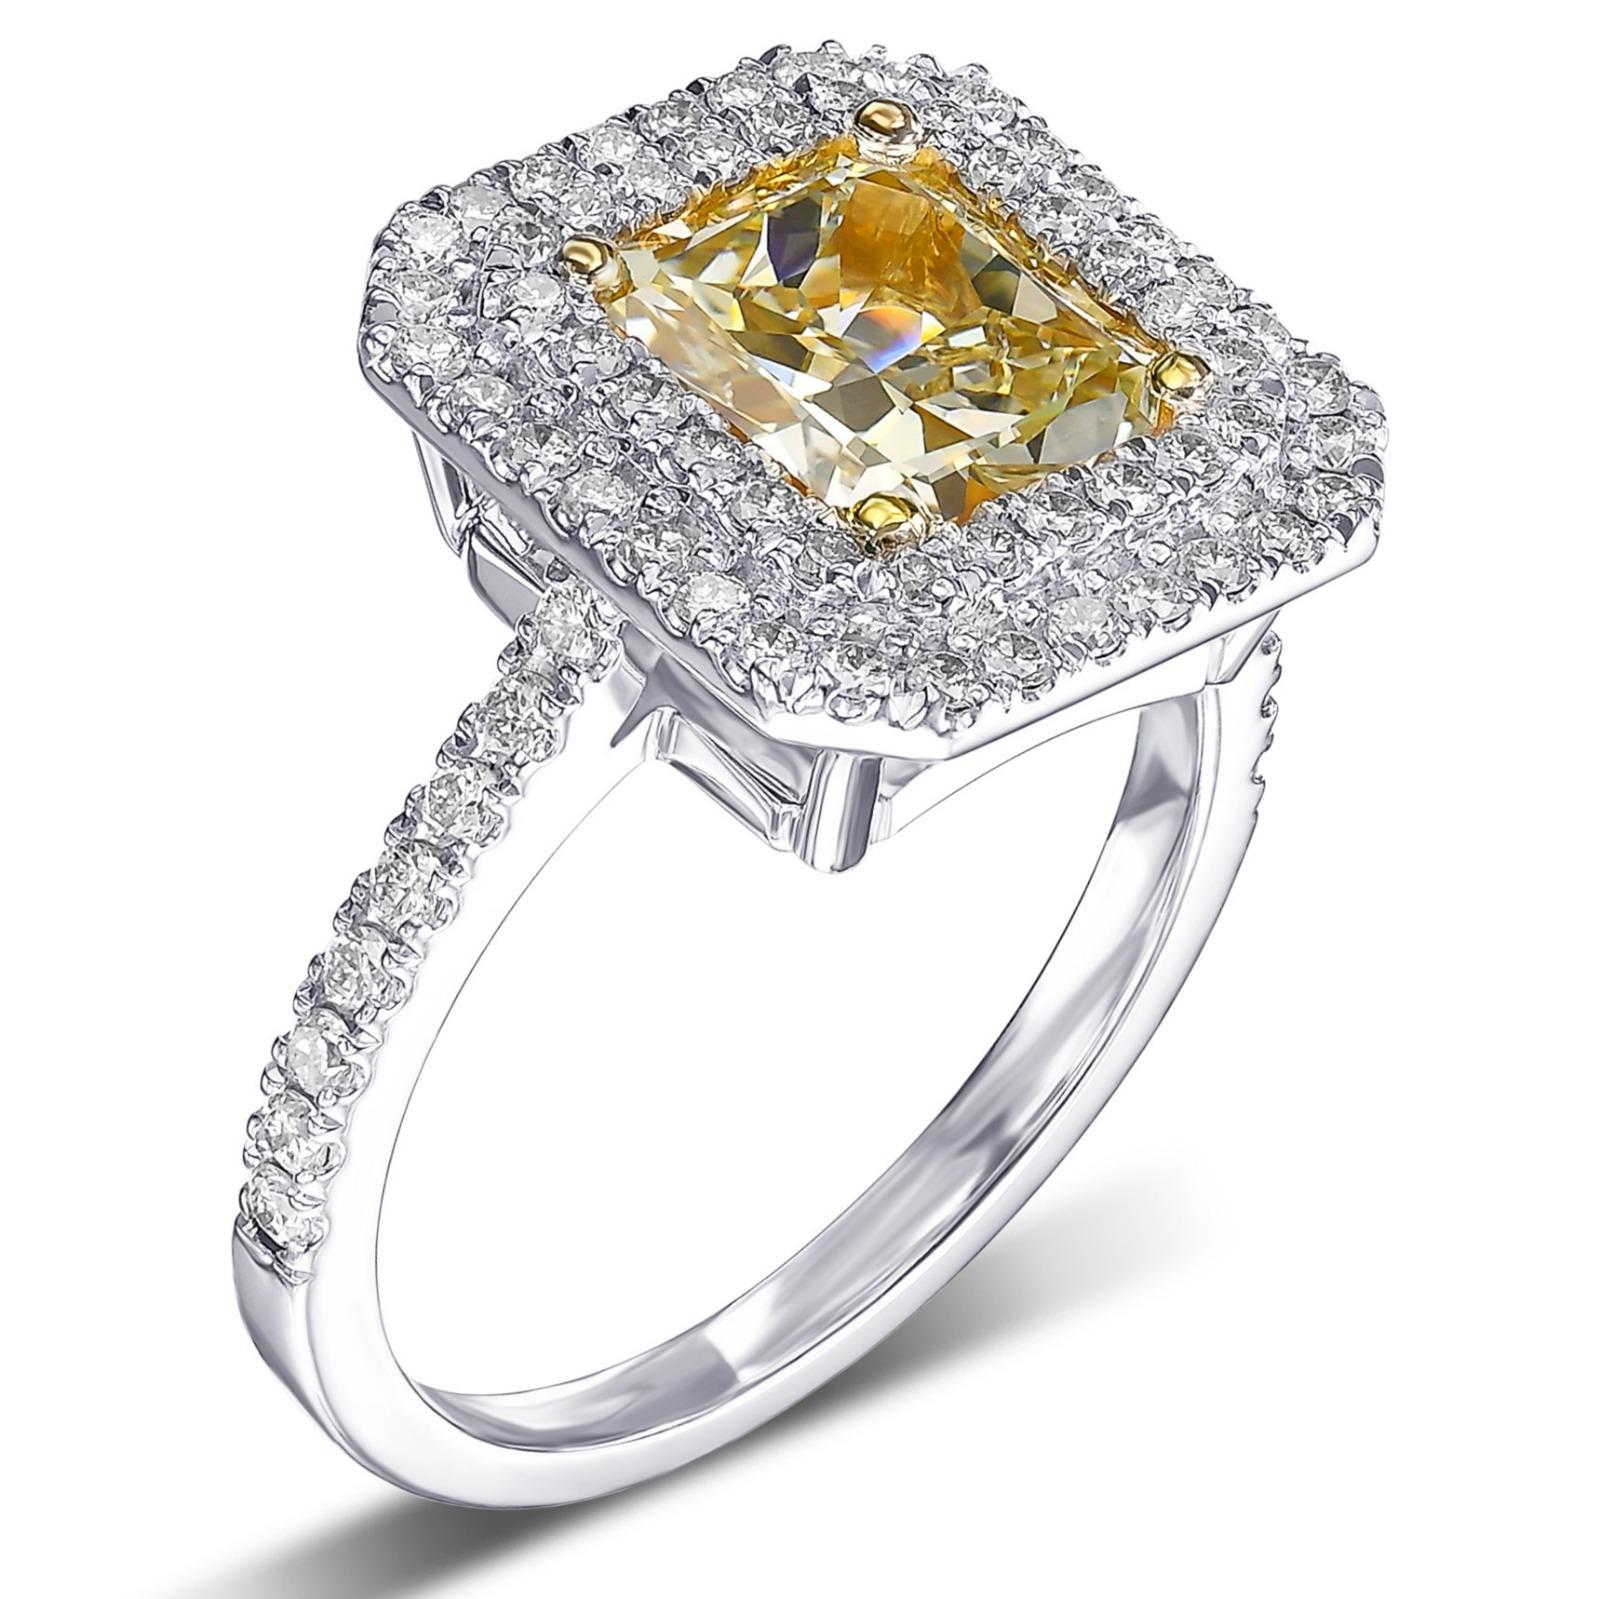 Today we are offering this amazing ring featuring a center 2.01 carat fancy light brownish greenish yellow diamond diamonds halo ring. 
A once in a lifetime opportunity to become the proud owner of this amazing ring. The ring has tremendous